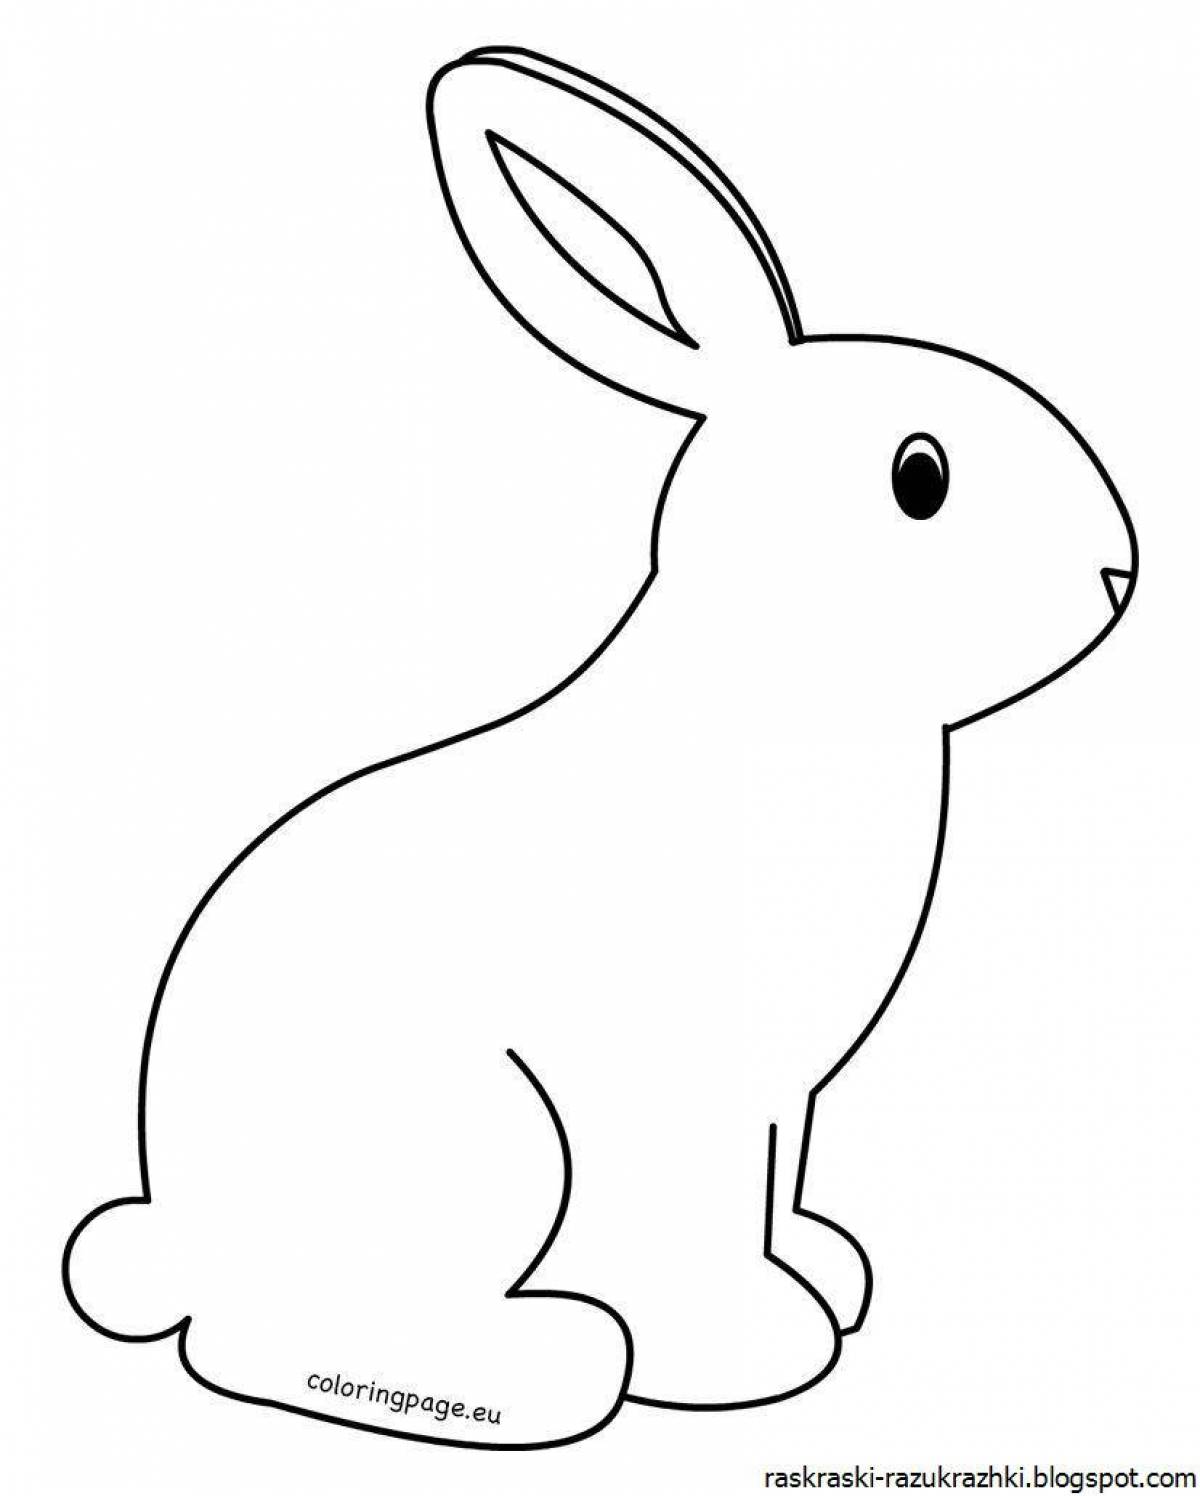 Wonderful rabbit coloring book for children 3-4 years old